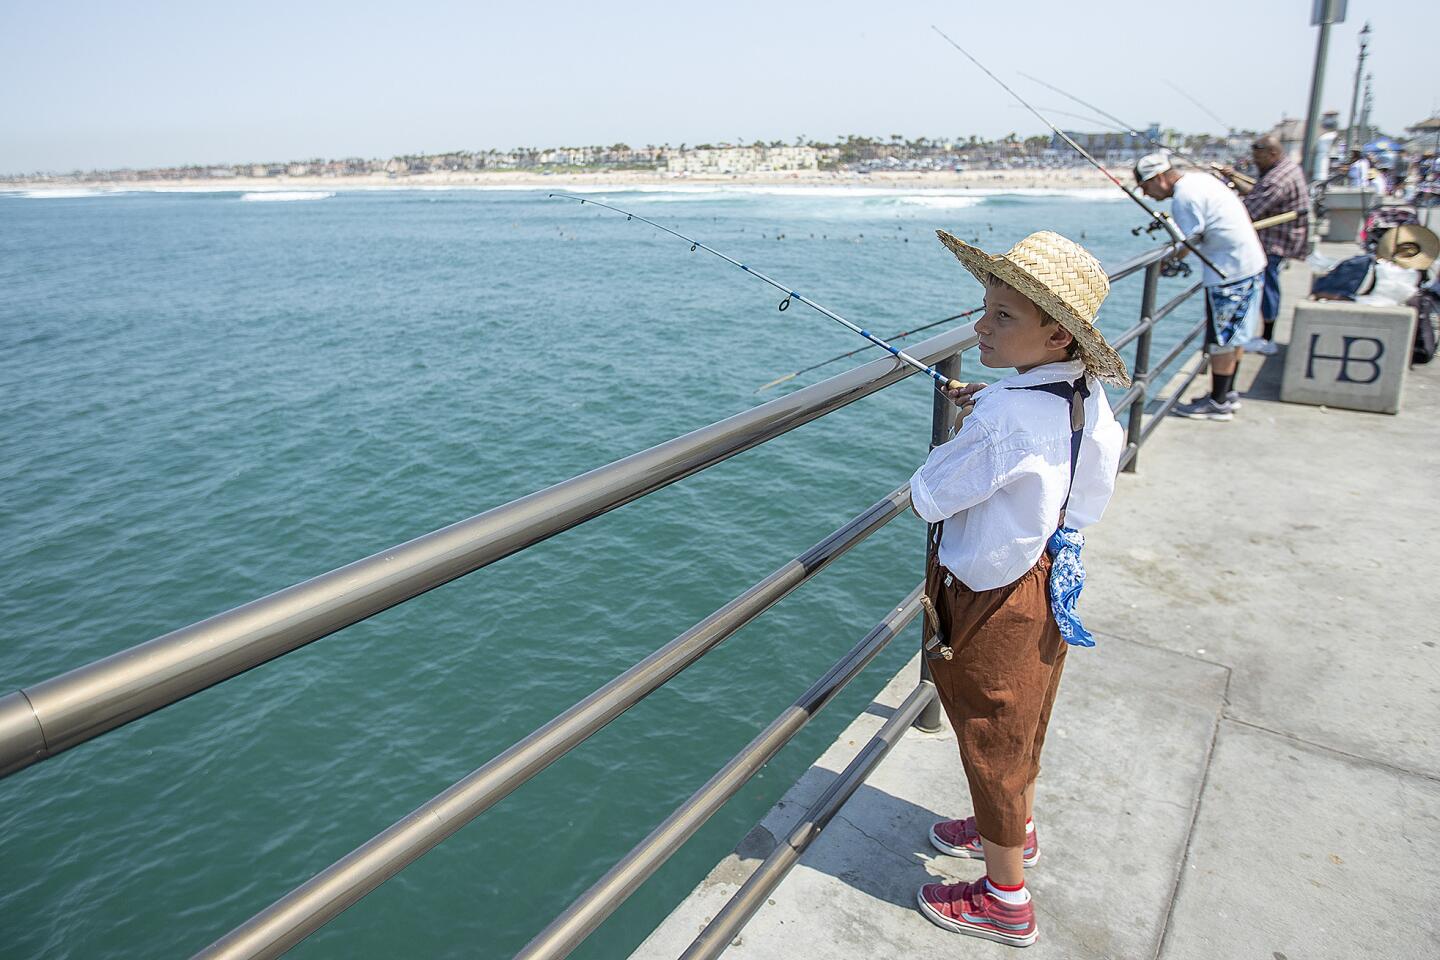 Huck Finn Fishing Derby lures young anglers in Huntington Beach